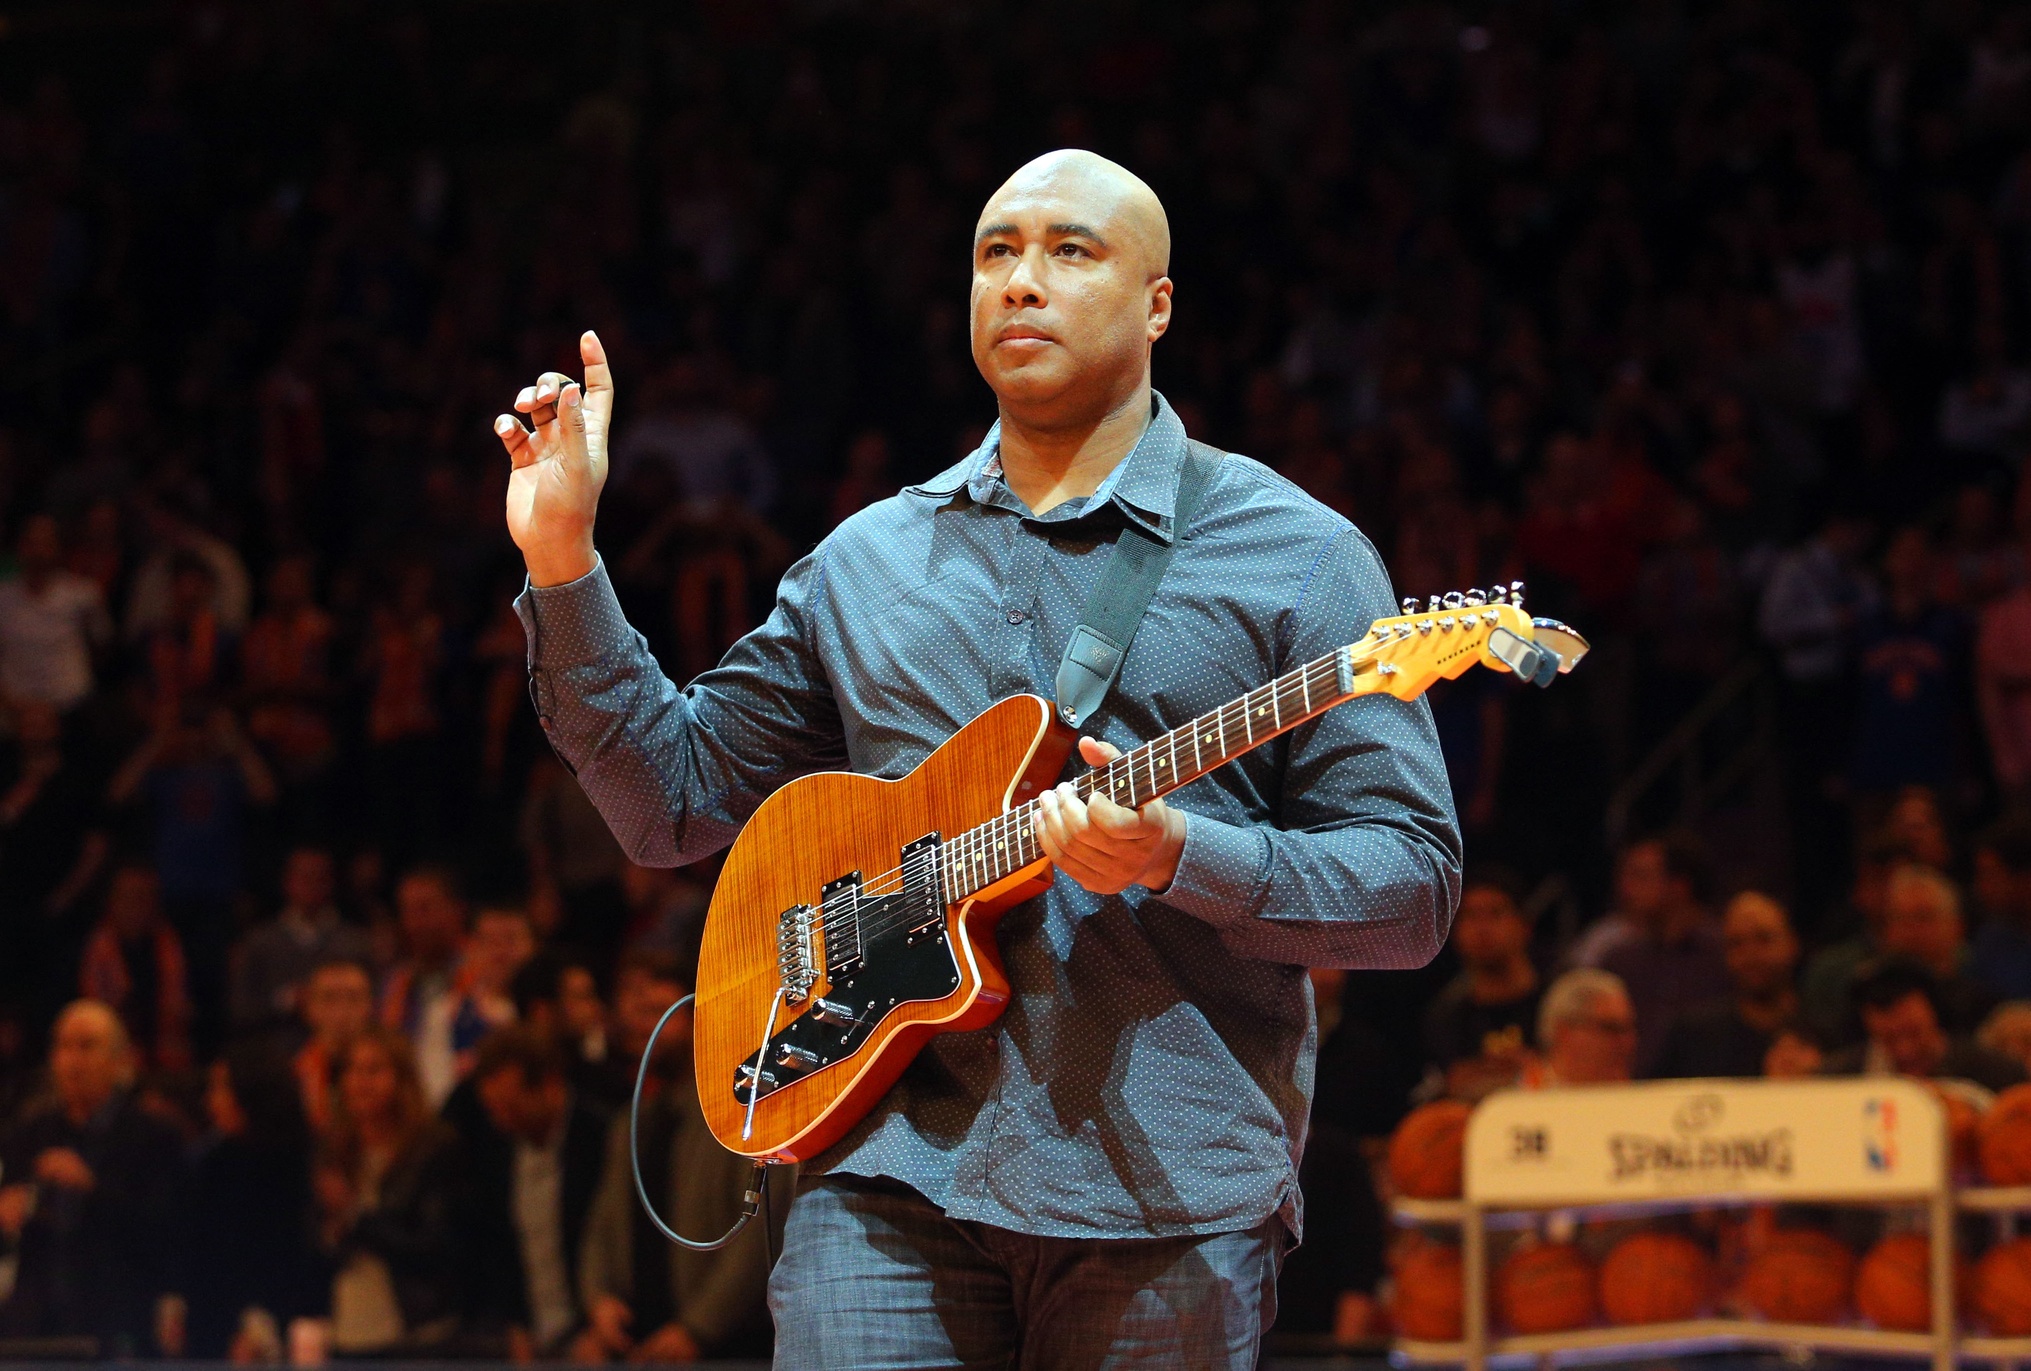 Bernie Williams to finally sign retirement papers at Yankee